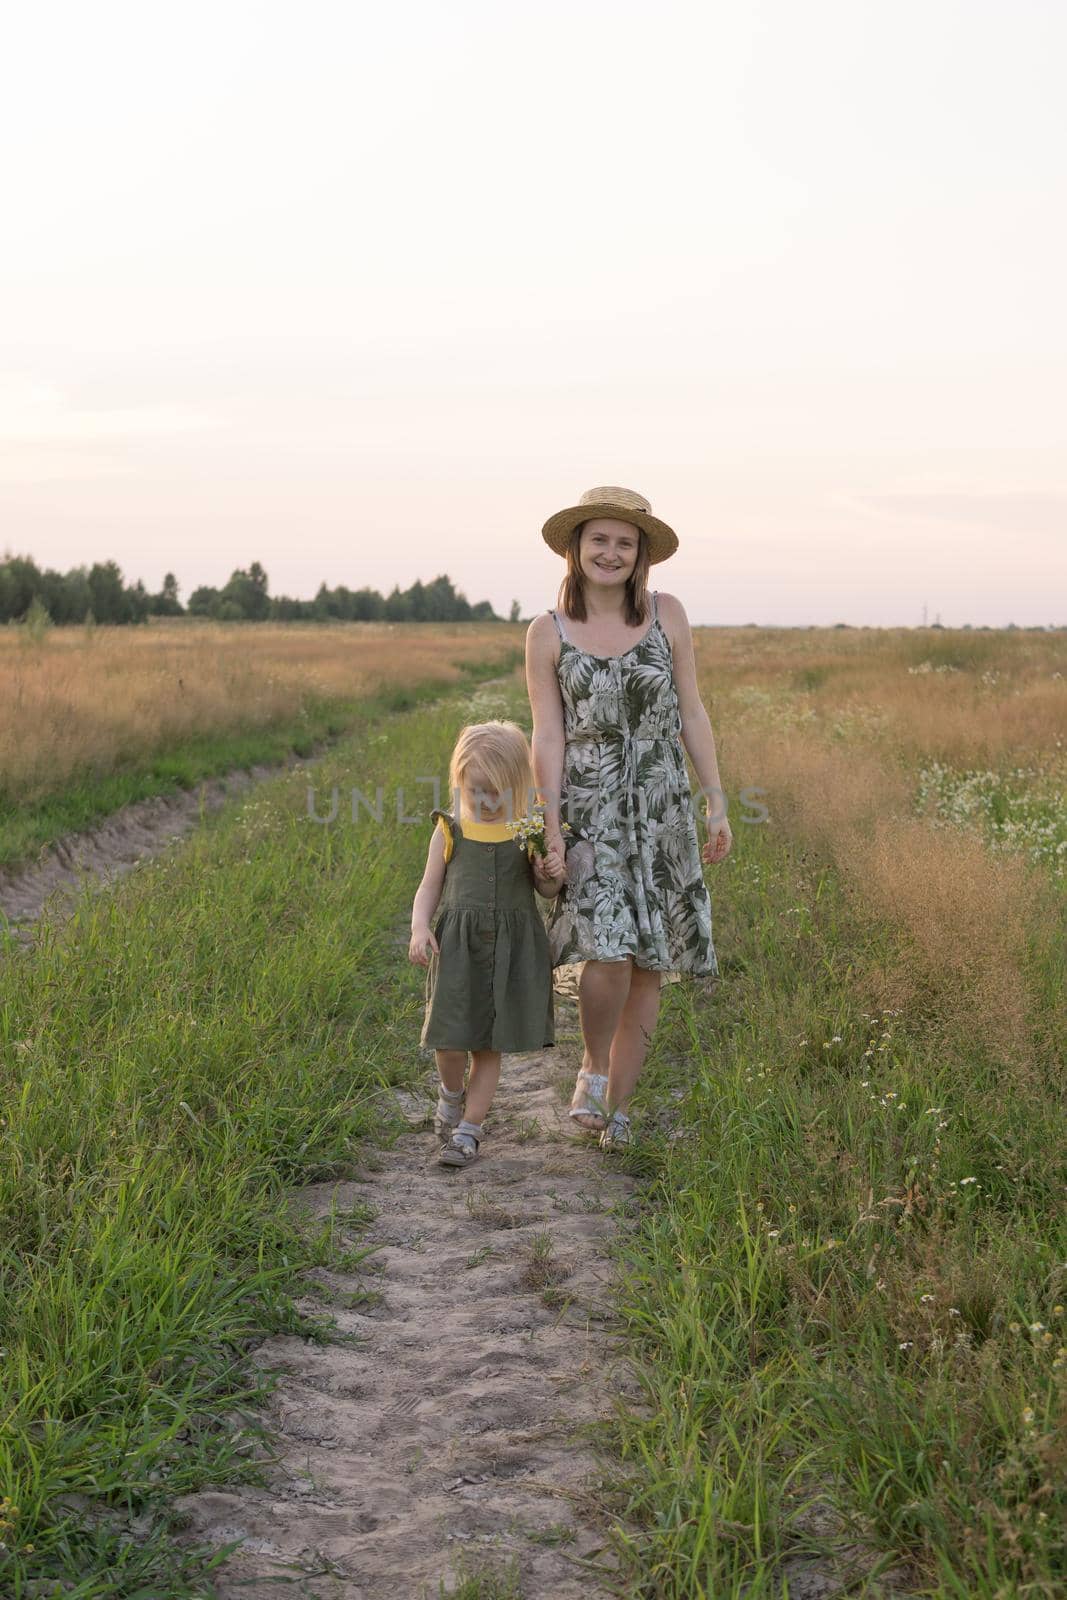 Mom and daughter walk through a chamomile field, and collect a bouquet of flowers. The concept of family relations, nature walks, freedom and a healthy lifestyle.